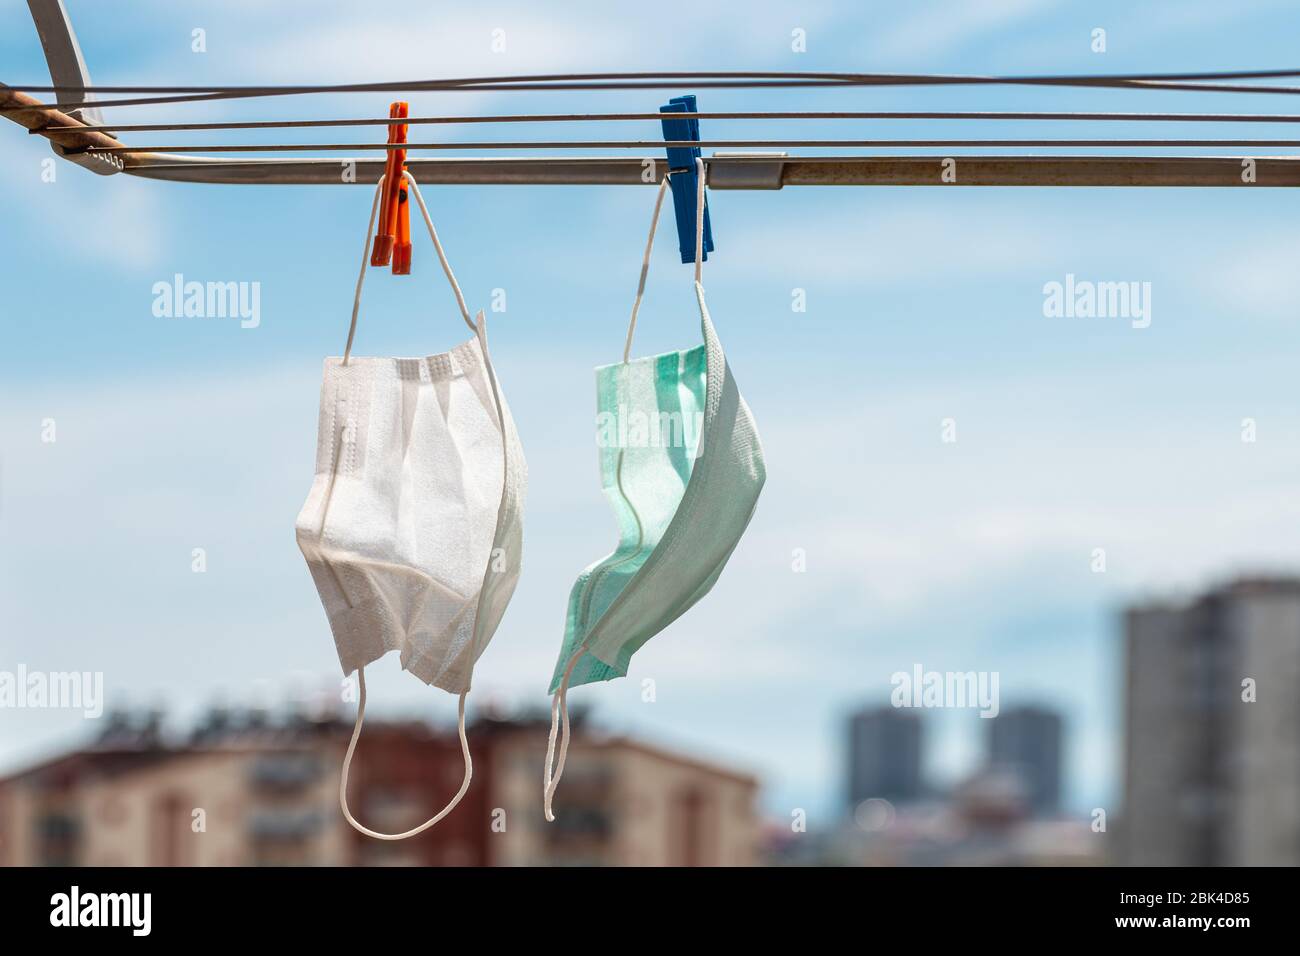 Protective Medical mask hung on the clothes line during Covid-19 coronavirus pandemic quarantine Stock Photo